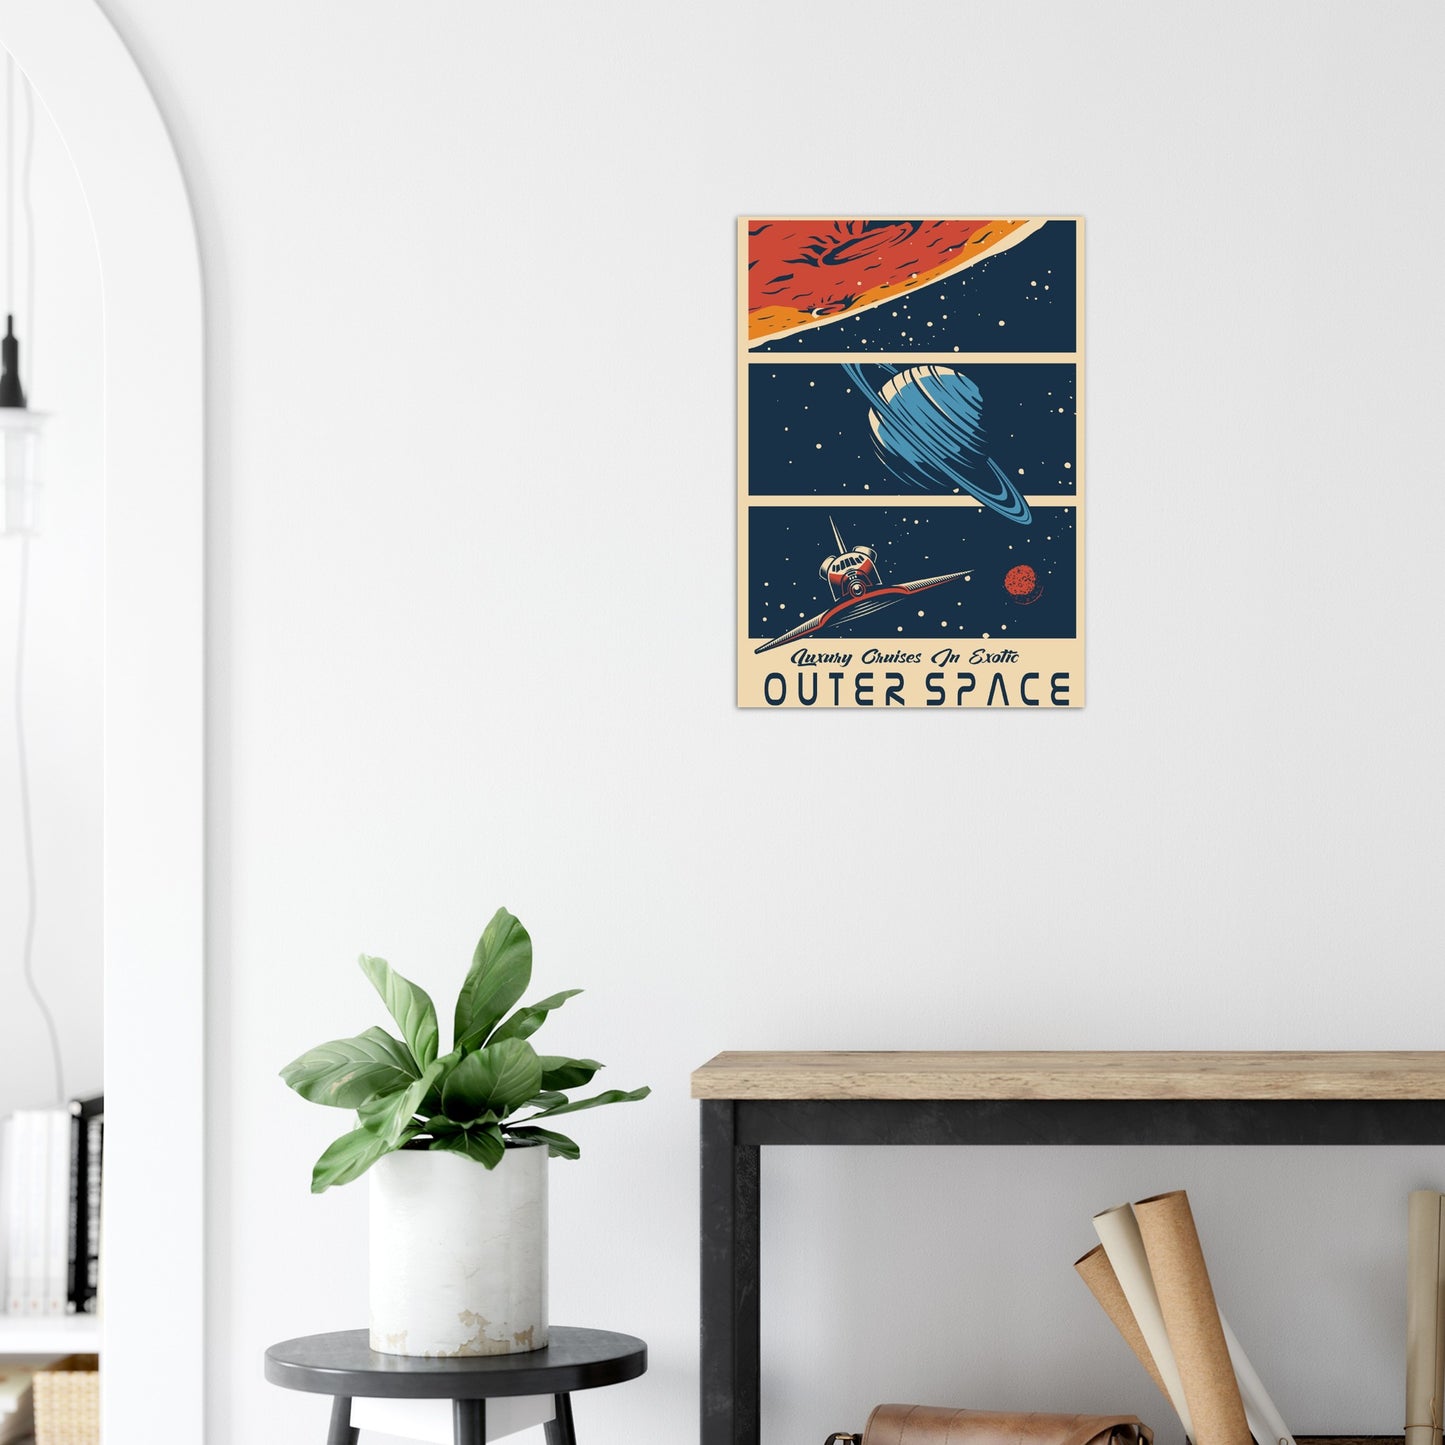 Luxury Cruises in Exotic Outer Space - Classic Matte Paper Poster